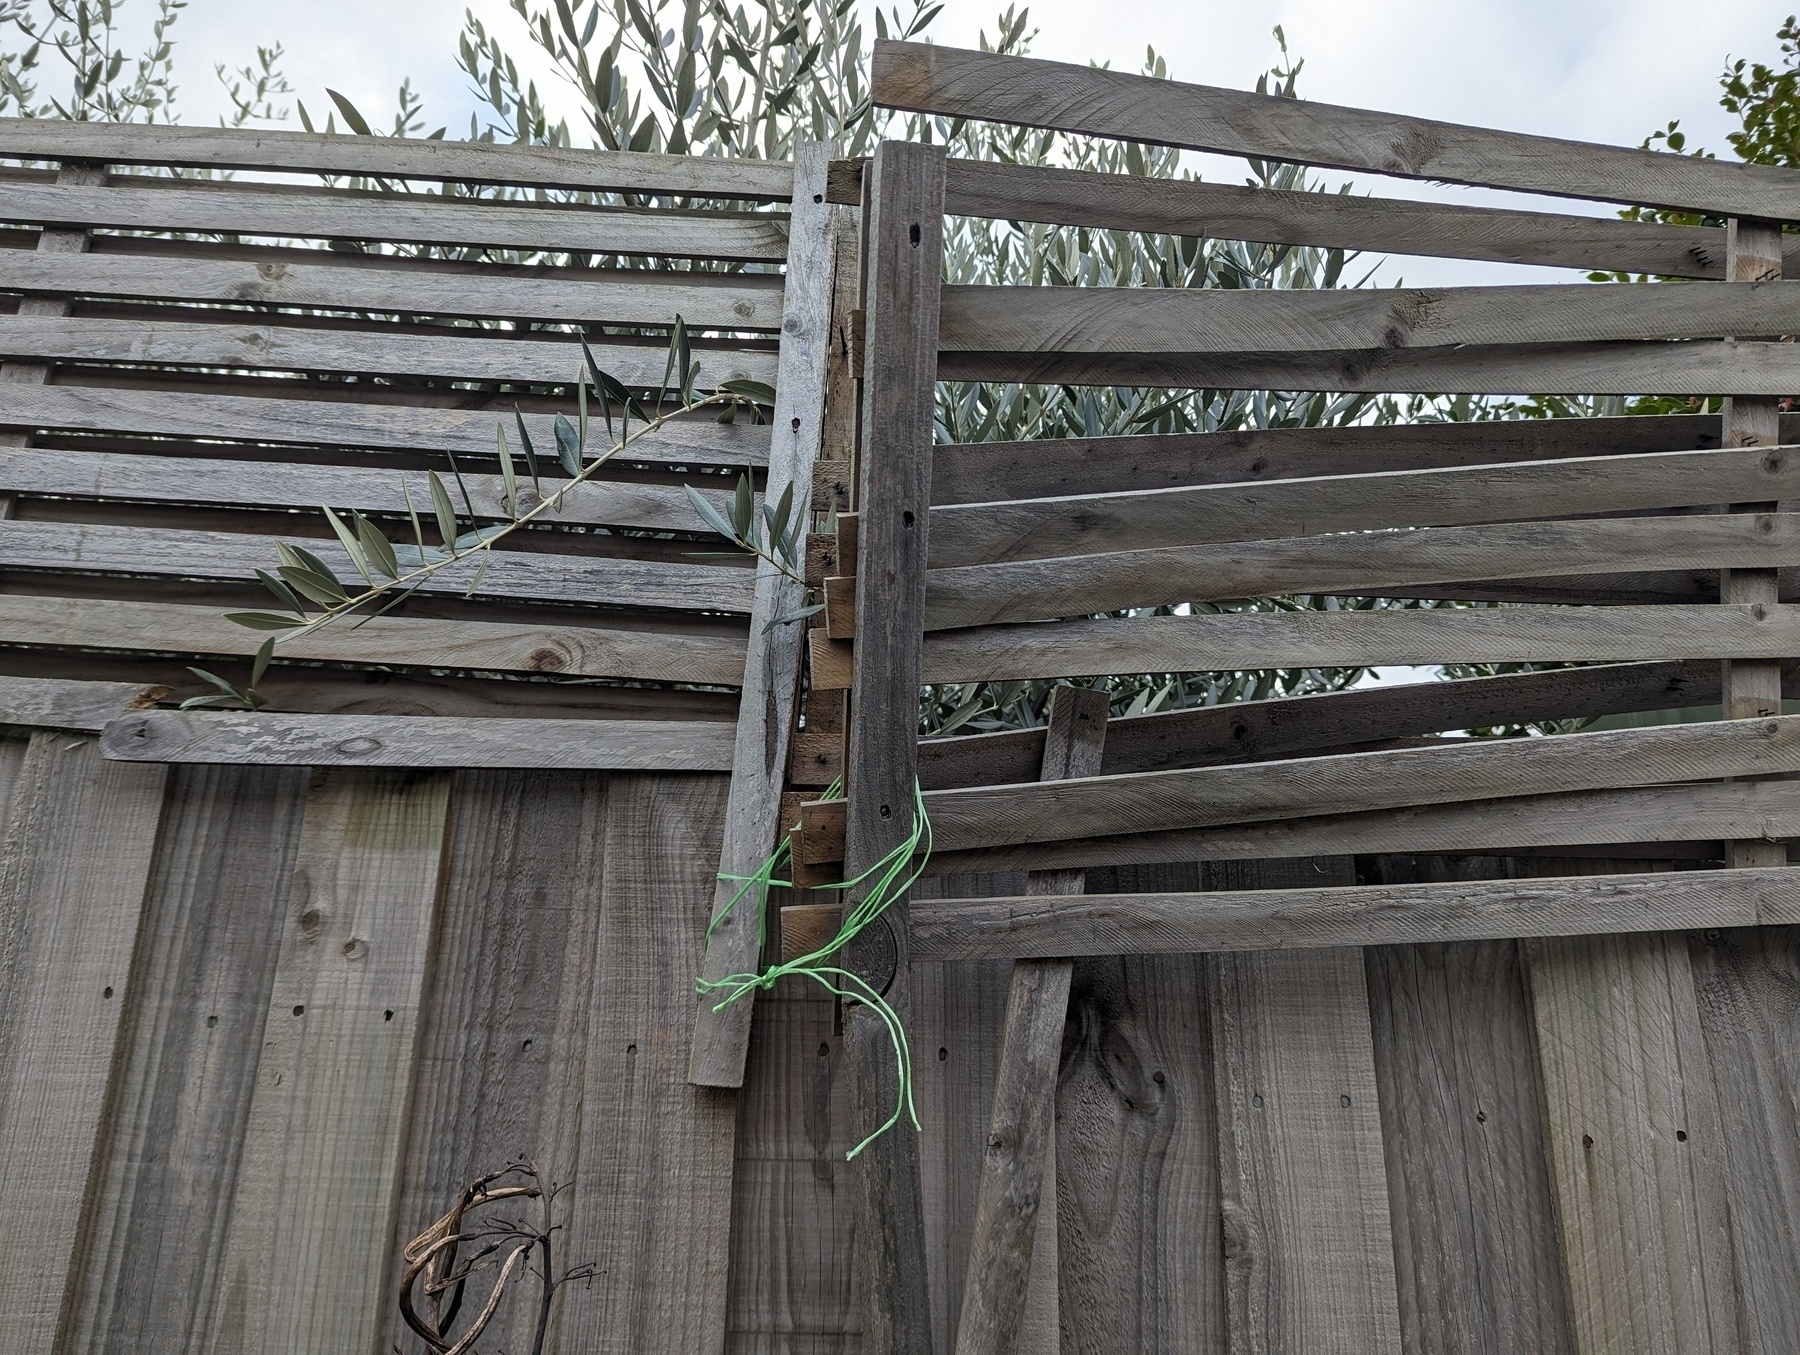 Auto-generated description: A partially damaged wooden fence with a makeshift repair tied together using green string and an olive tree branch protruding through the slats.